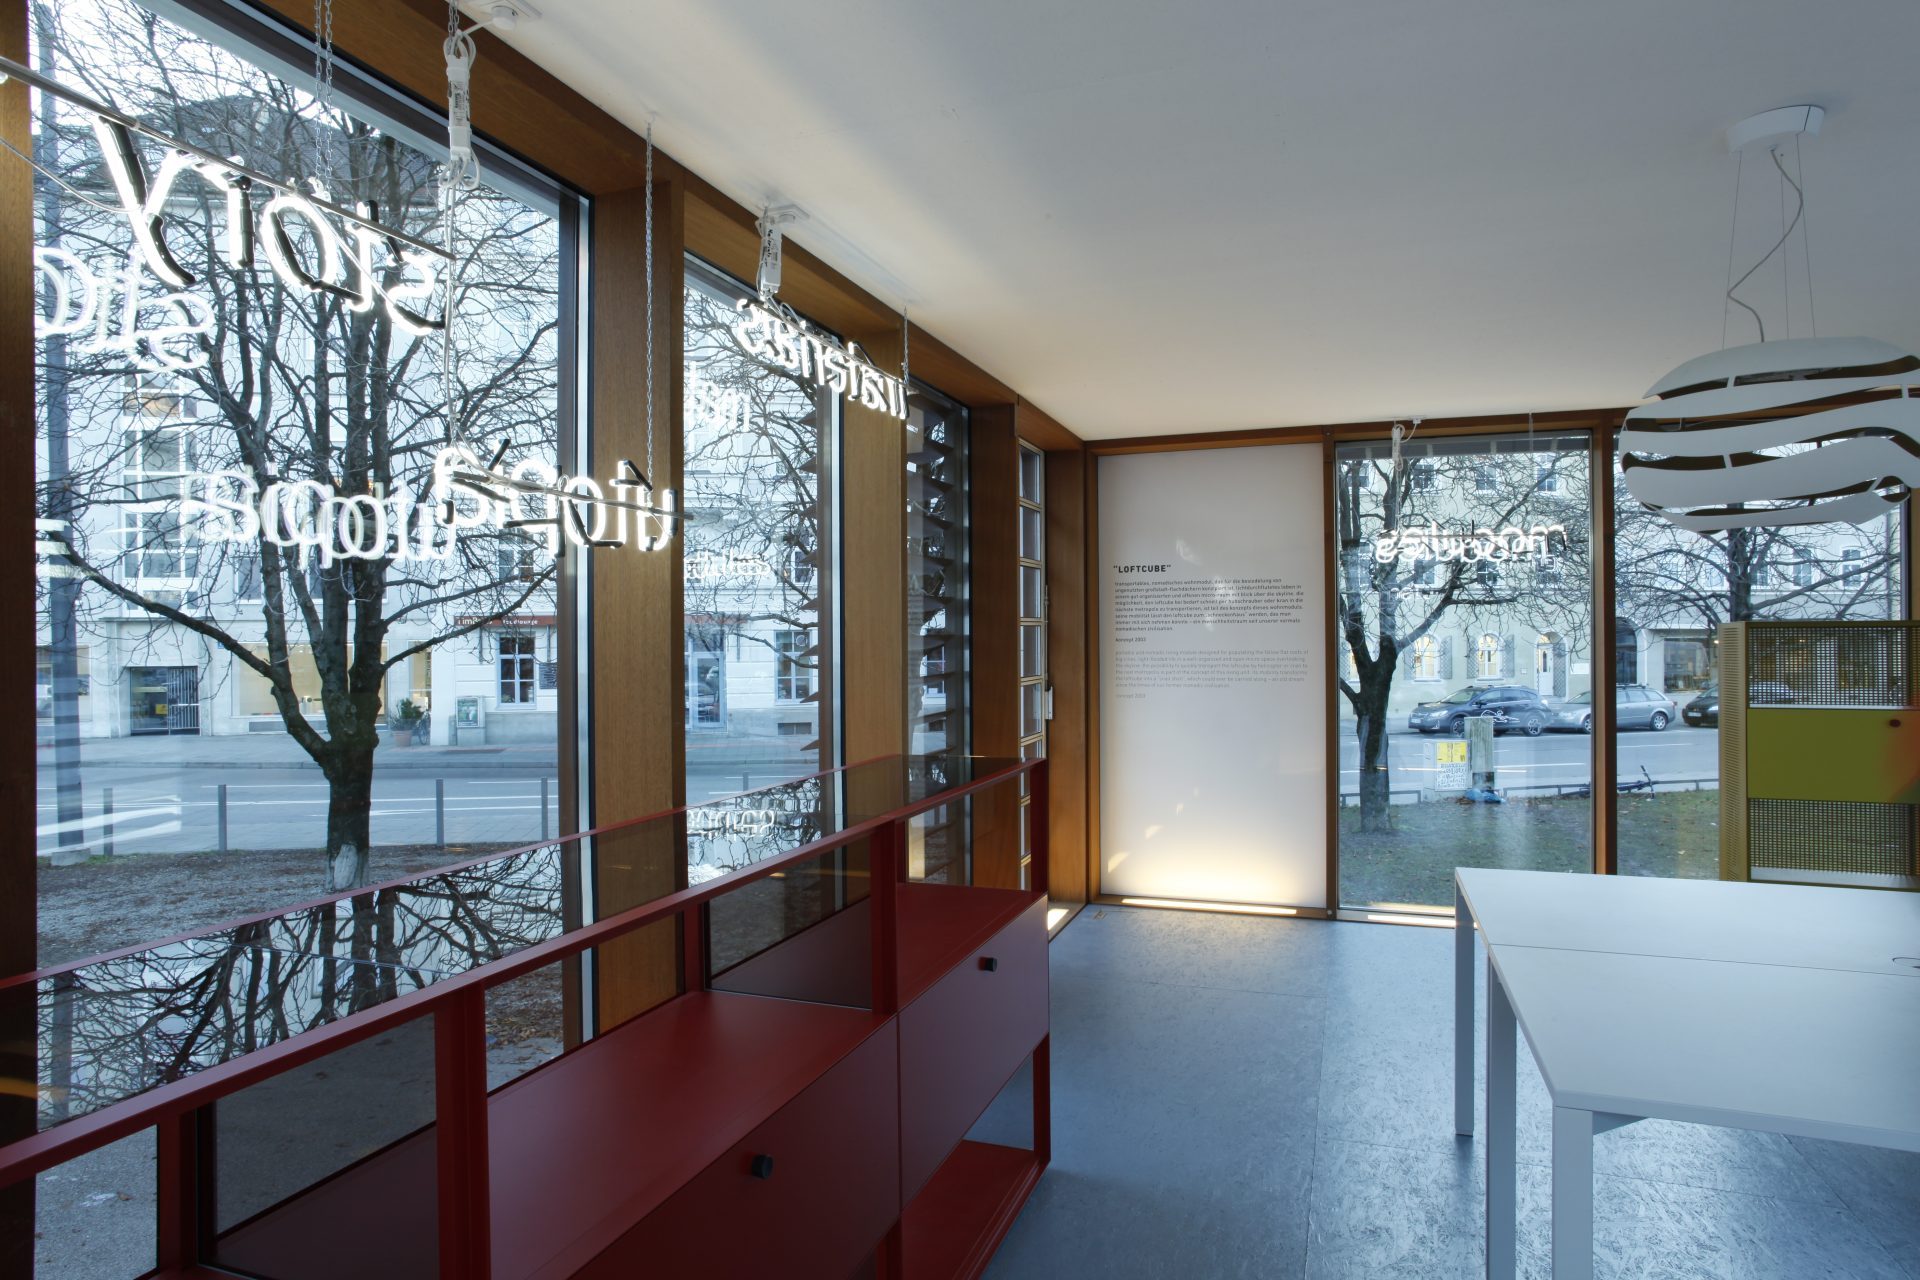 Interior view. Detailed view of a glass wall with illuminated lettering and a red shelf. To the right is a white table at the edge of the picture. An exhibition text is printed on the wall opposite.